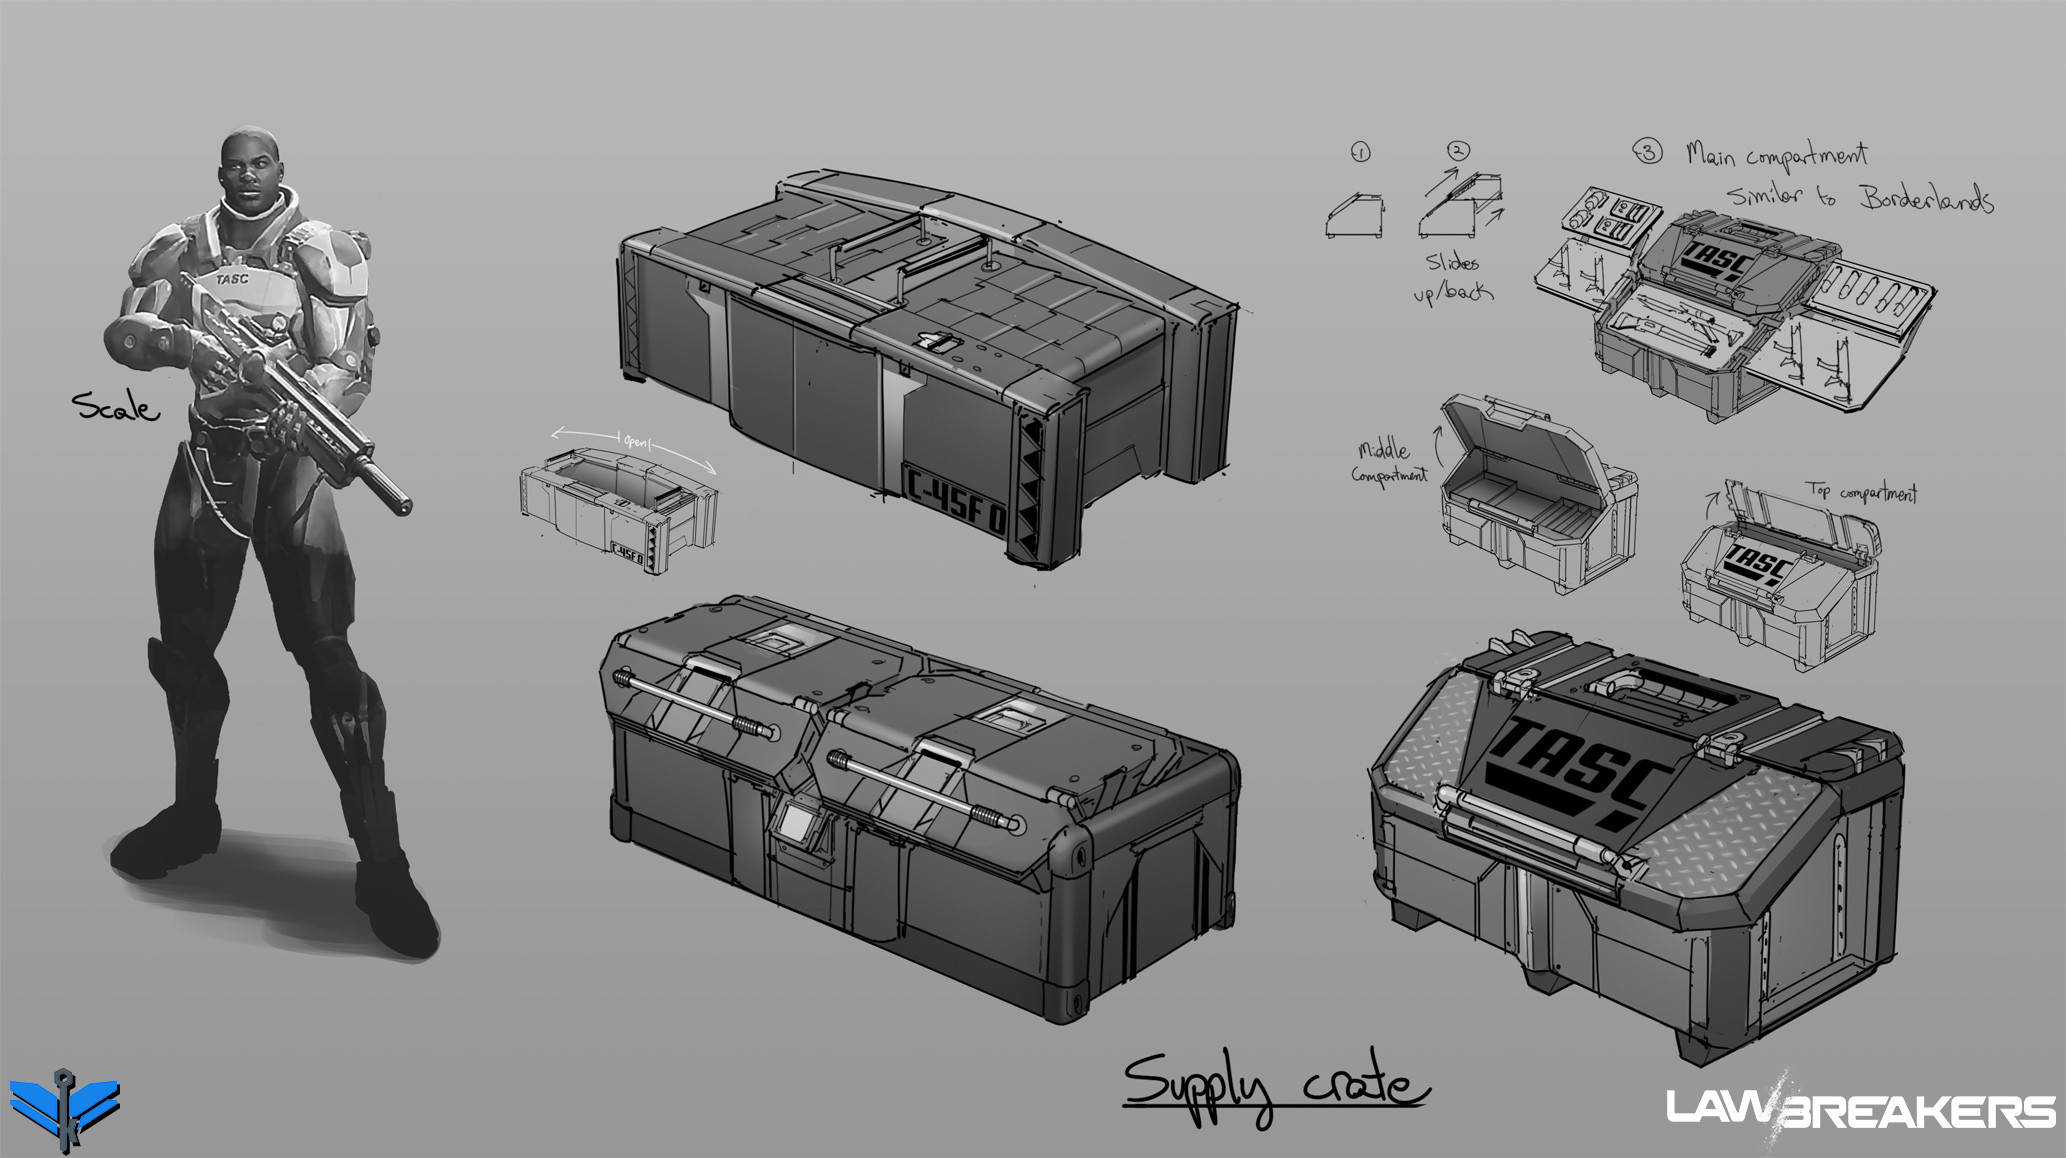 Supply crate prop concepts